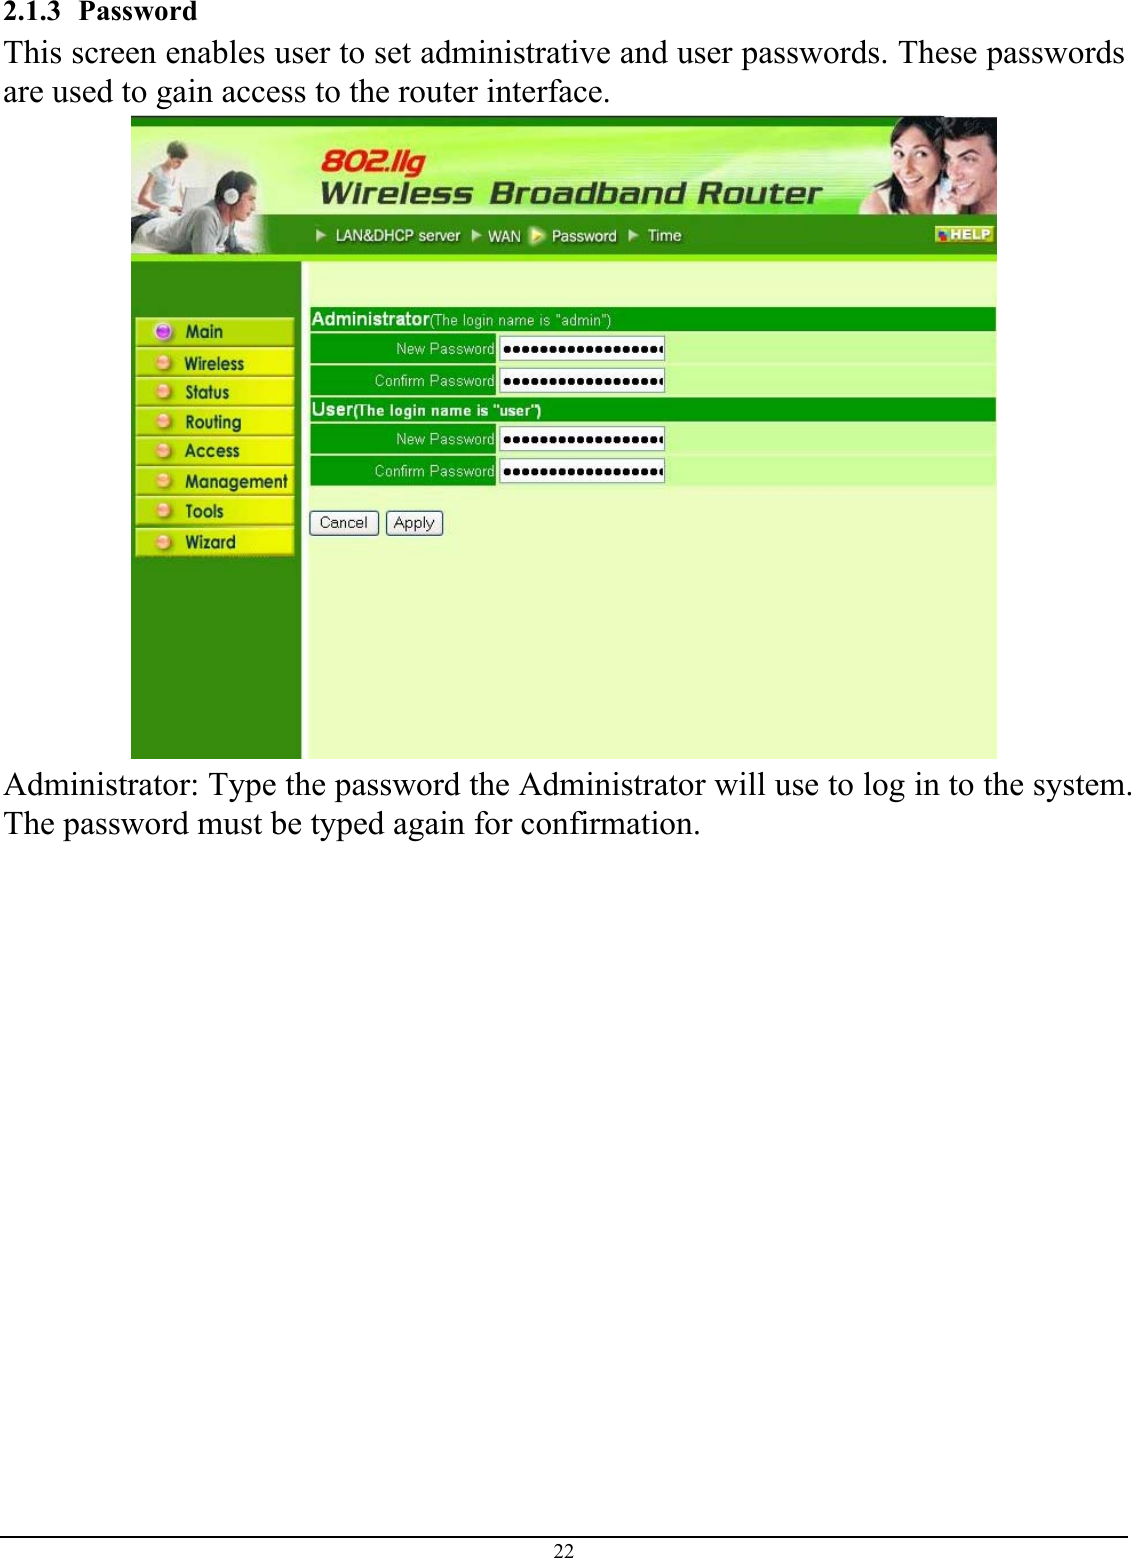 22 2.1.3 Password This screen enables user to set administrative and user passwords. These passwords are used to gain access to the router interface.  Administrator: Type the password the Administrator will use to log in to the system. The password must be typed again for confirmation. 